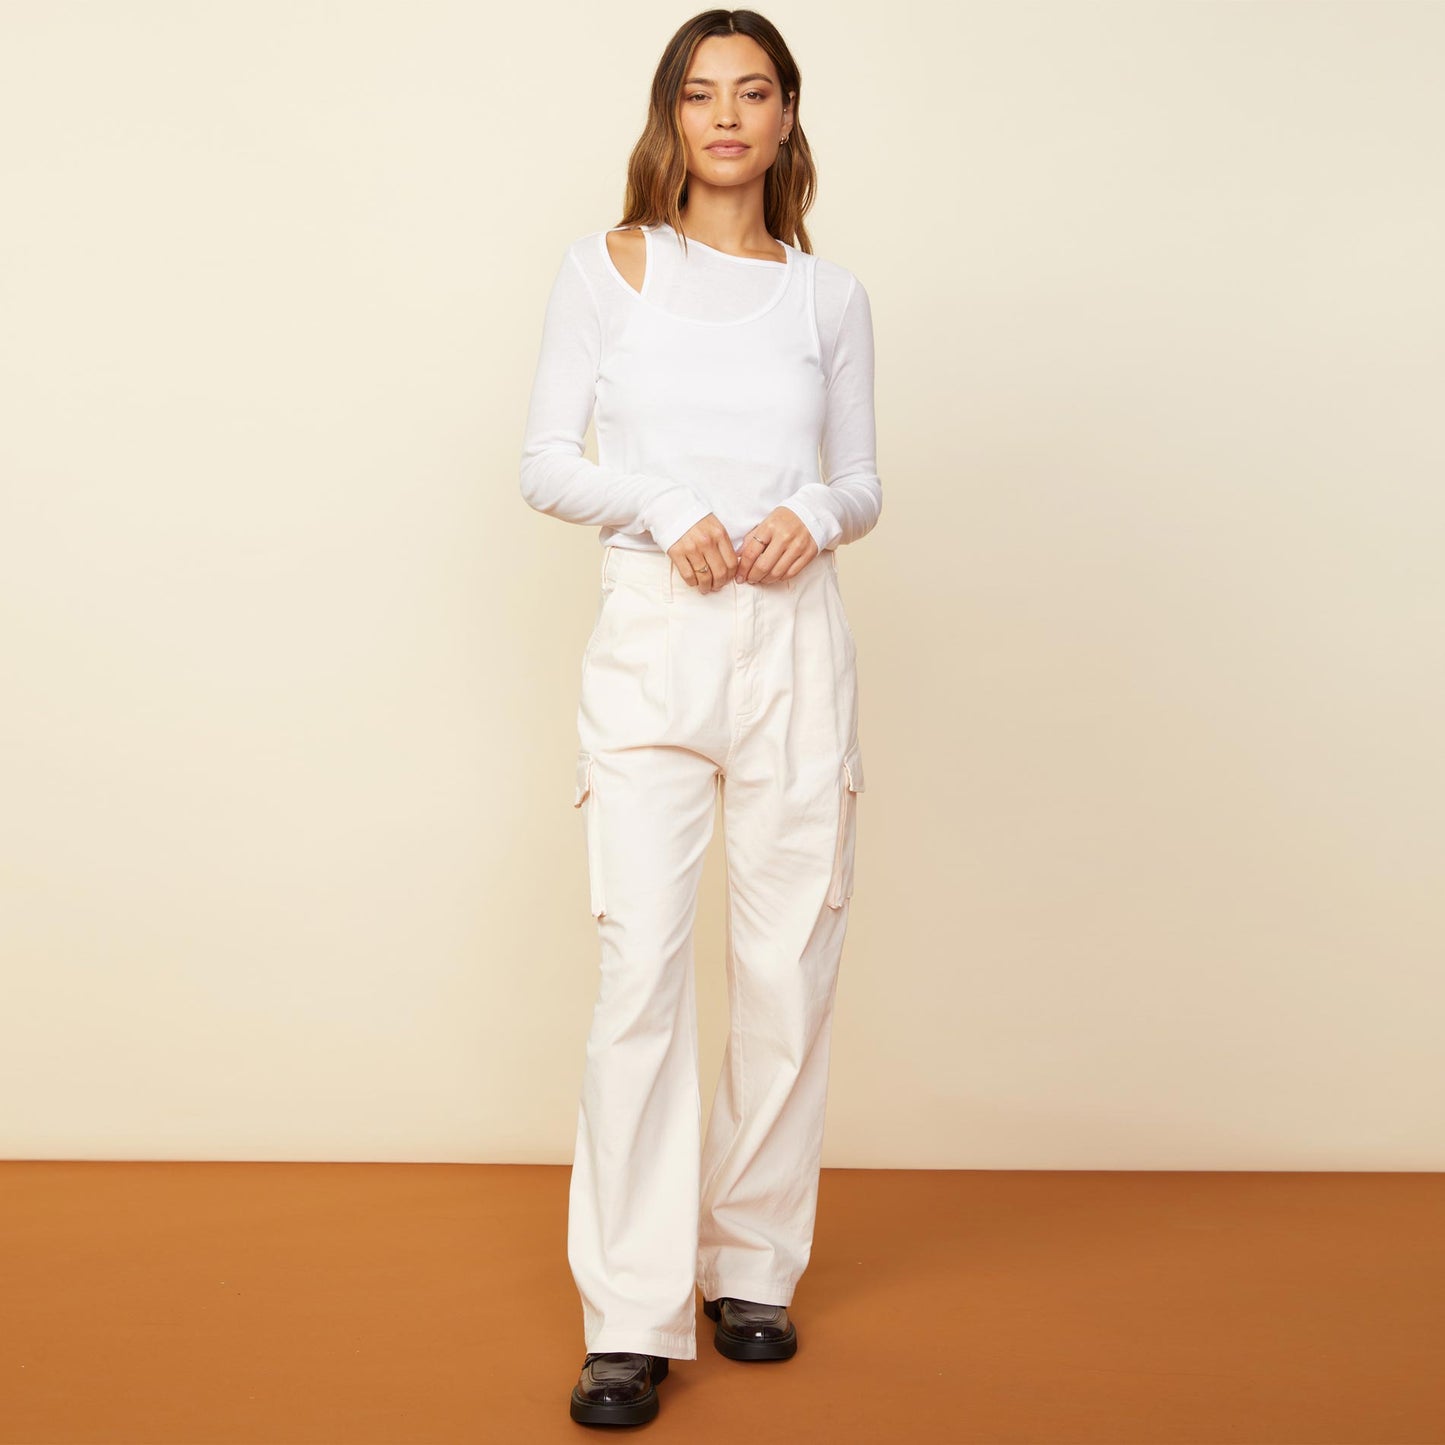 Front view of model wearing the asymmetric long sleeve top in white.